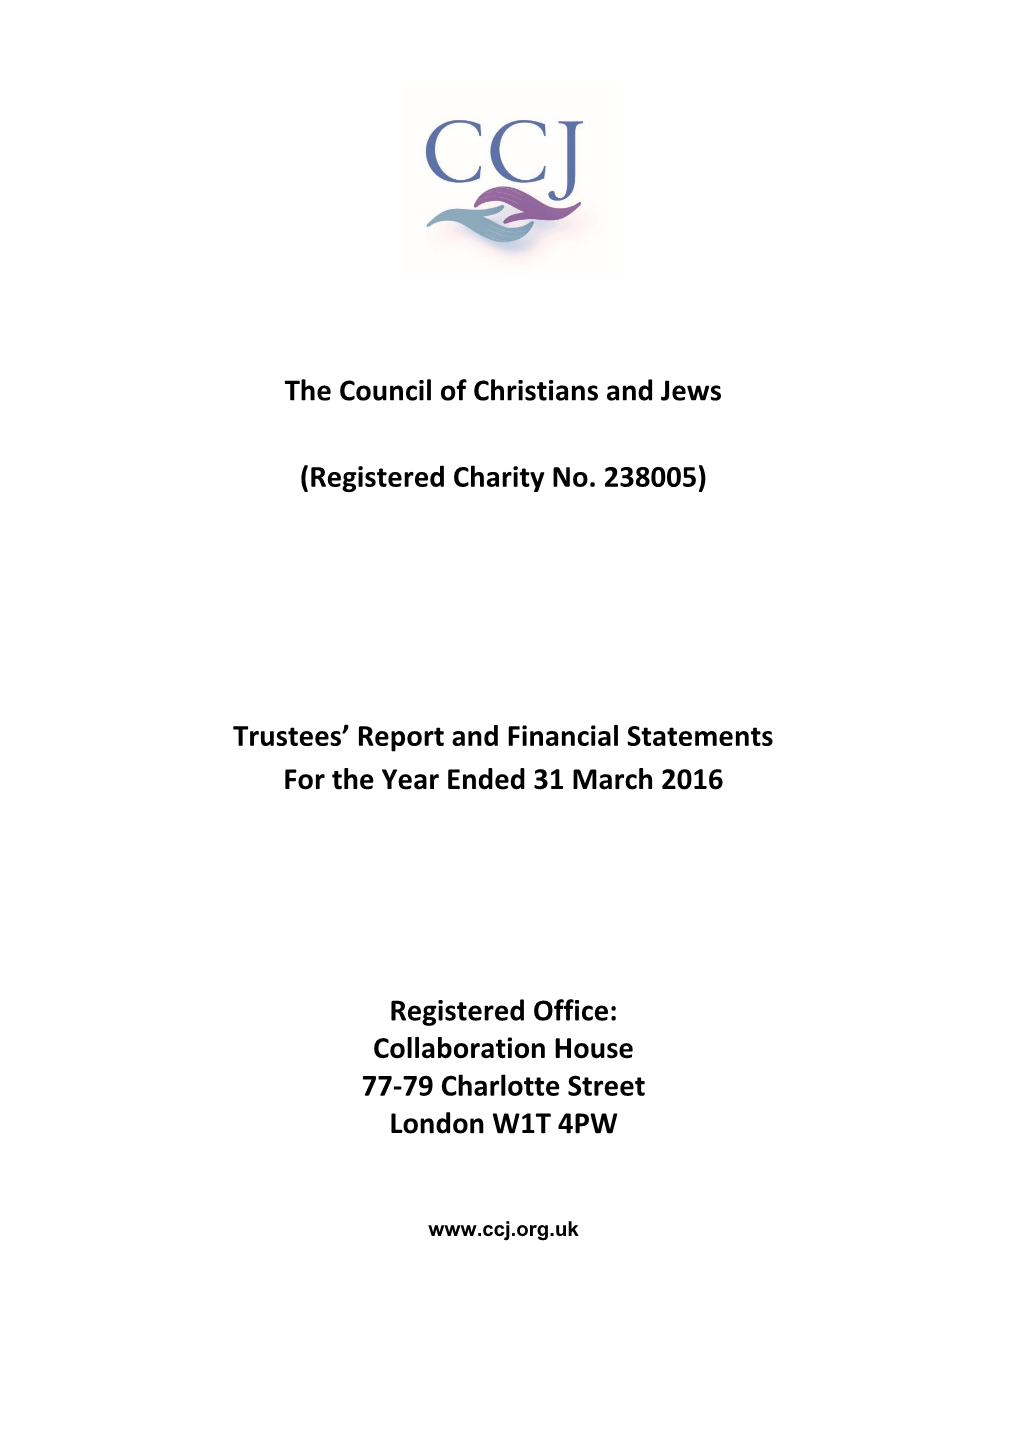 The Council of Christians and Jews